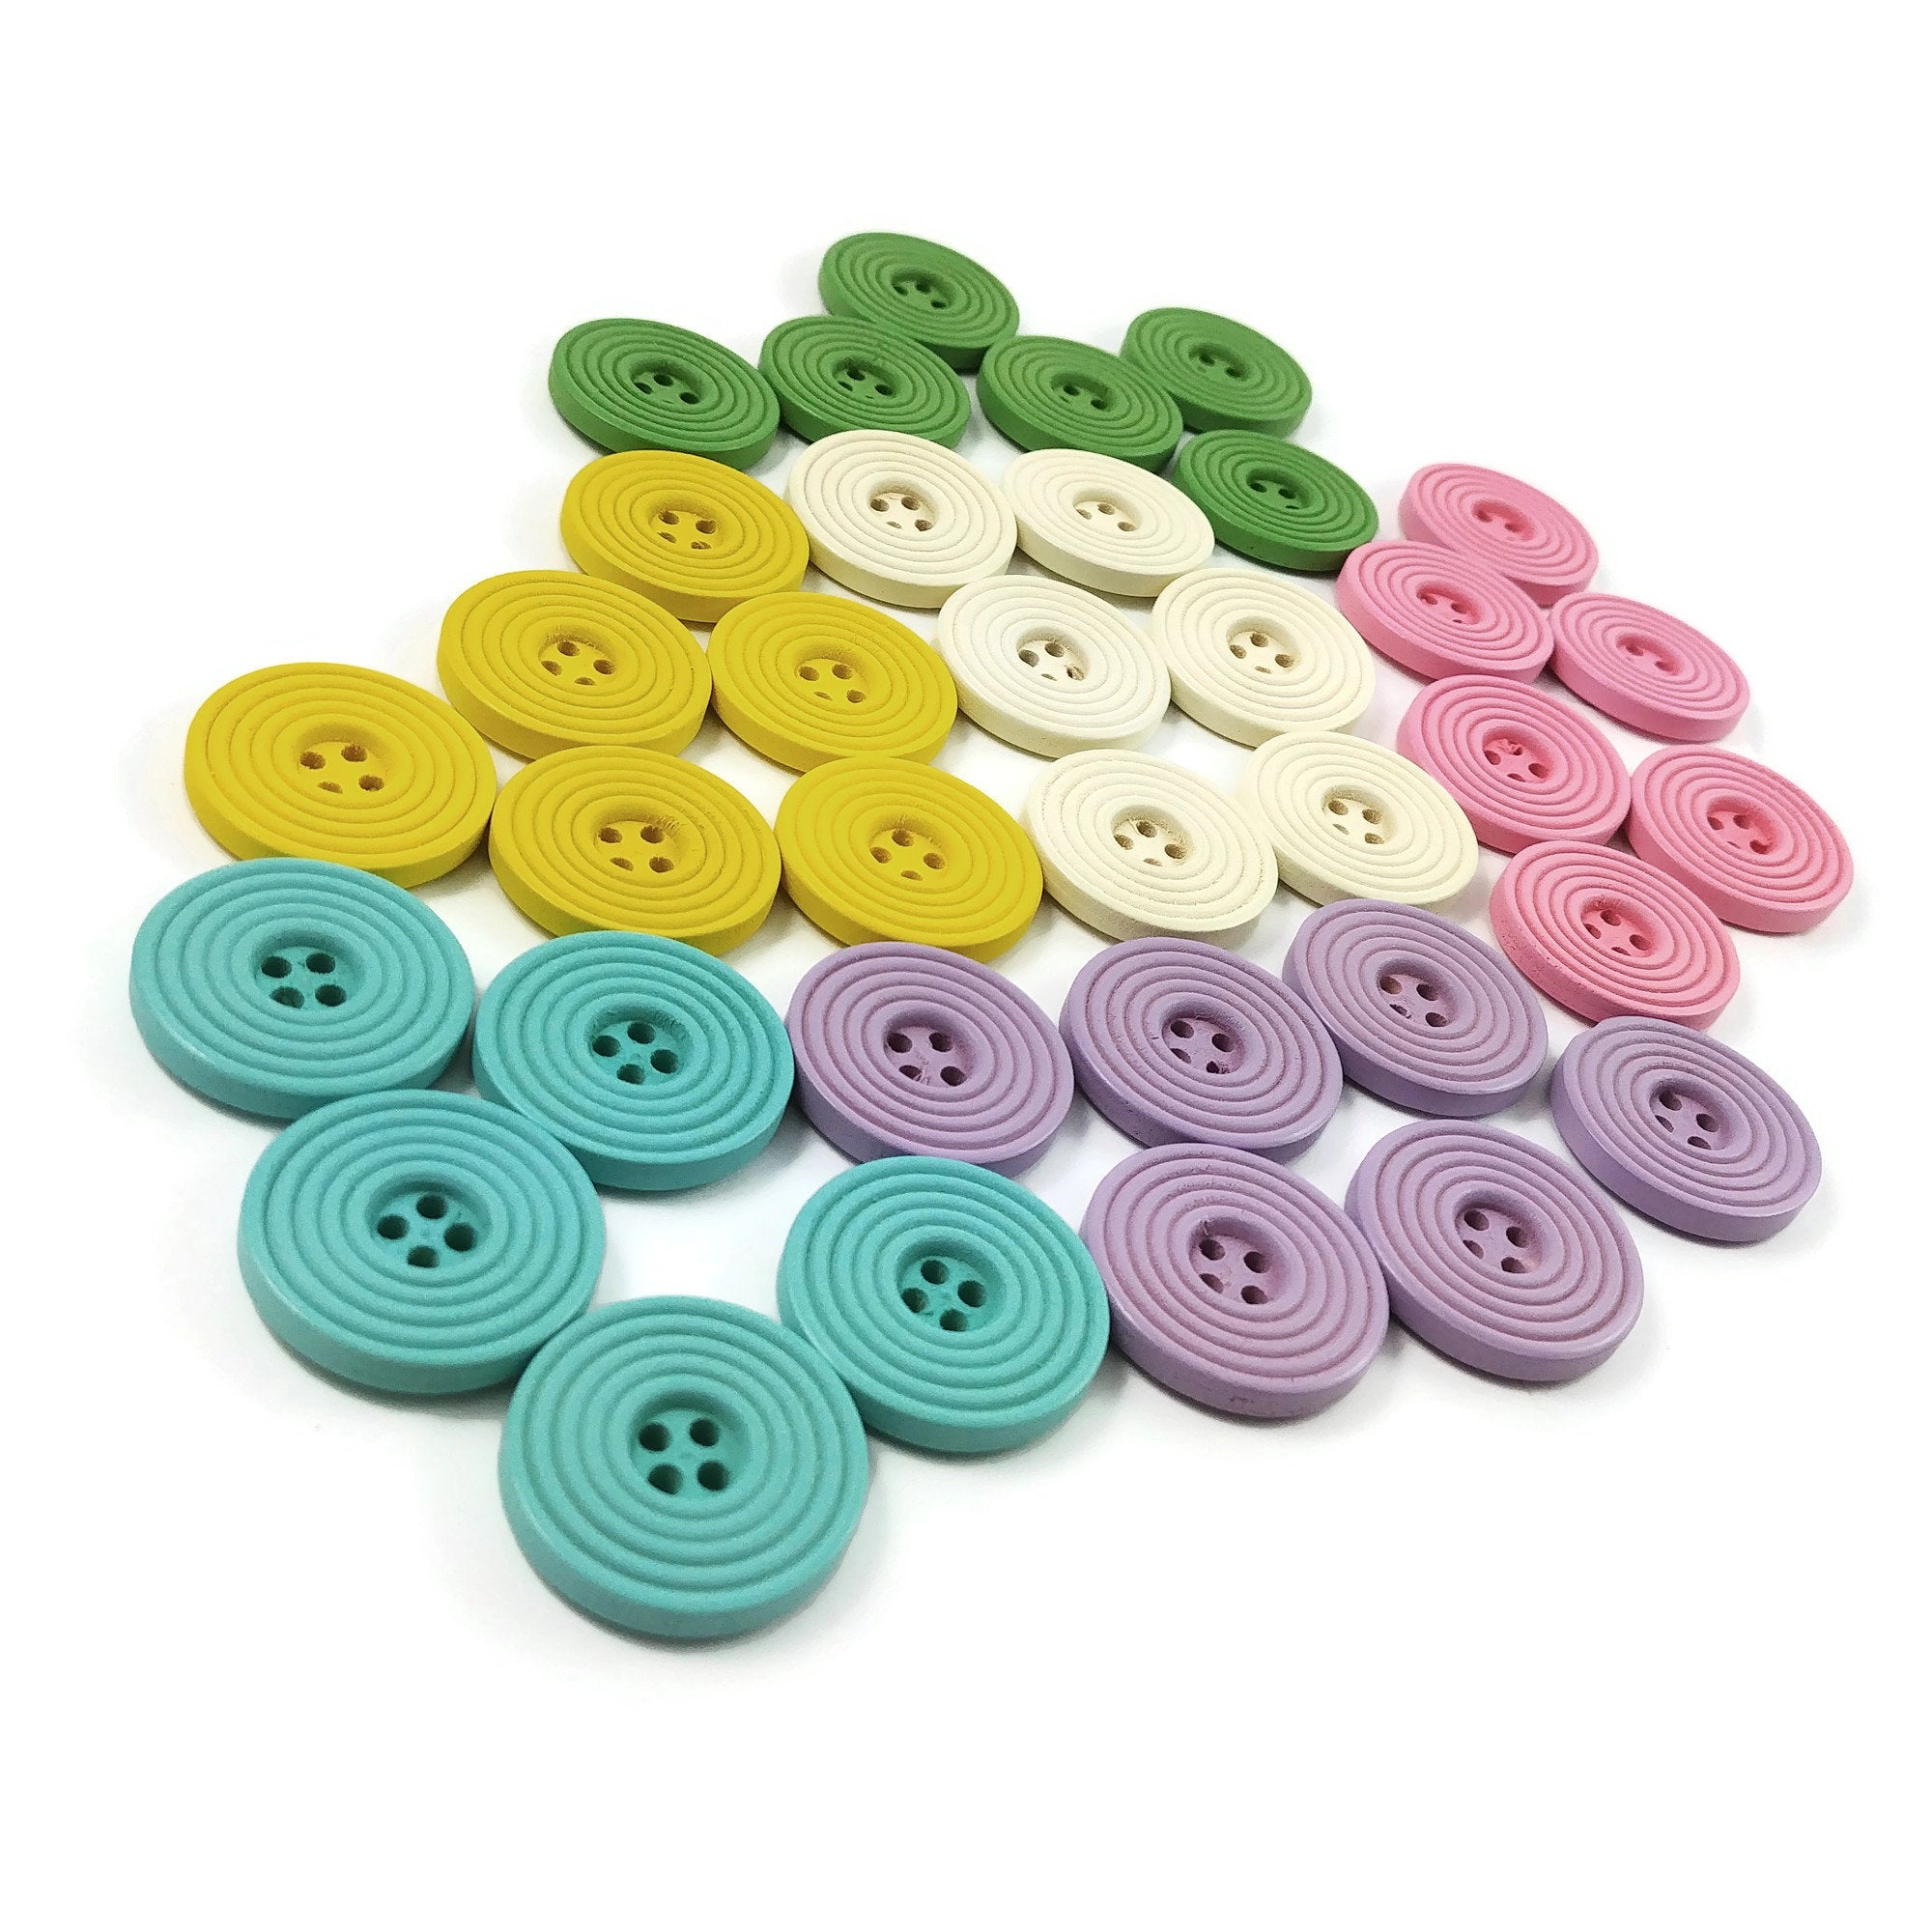 1 inch wooden pastel buttons 25mm - Set of 6 circle wood button - Choose your color